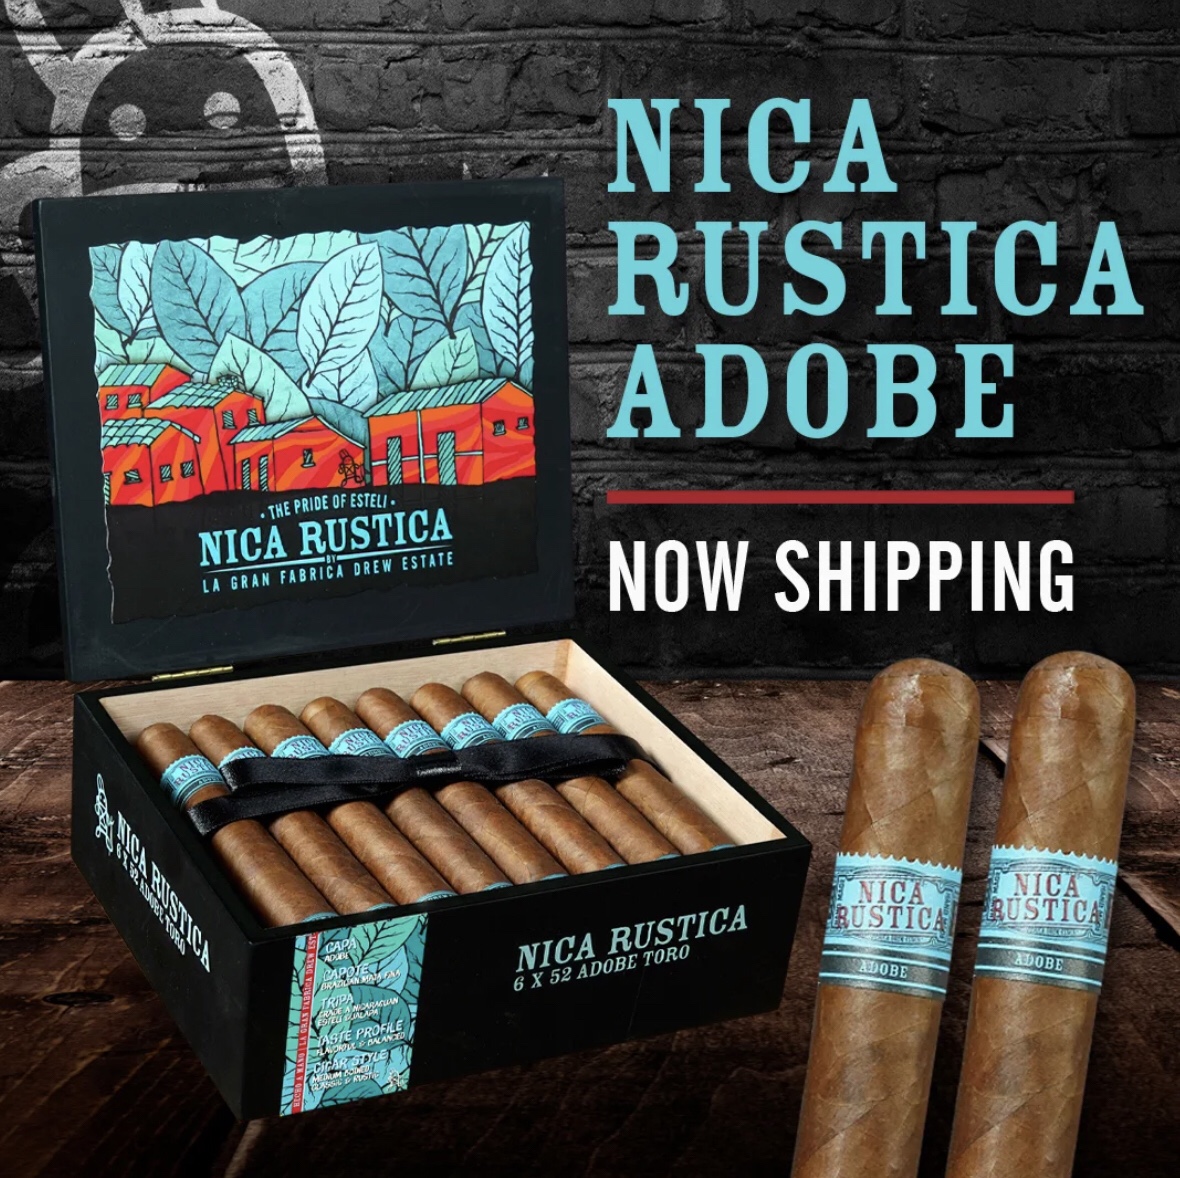 Nica Rustica Adobe Now Shipping From Drew Estate.